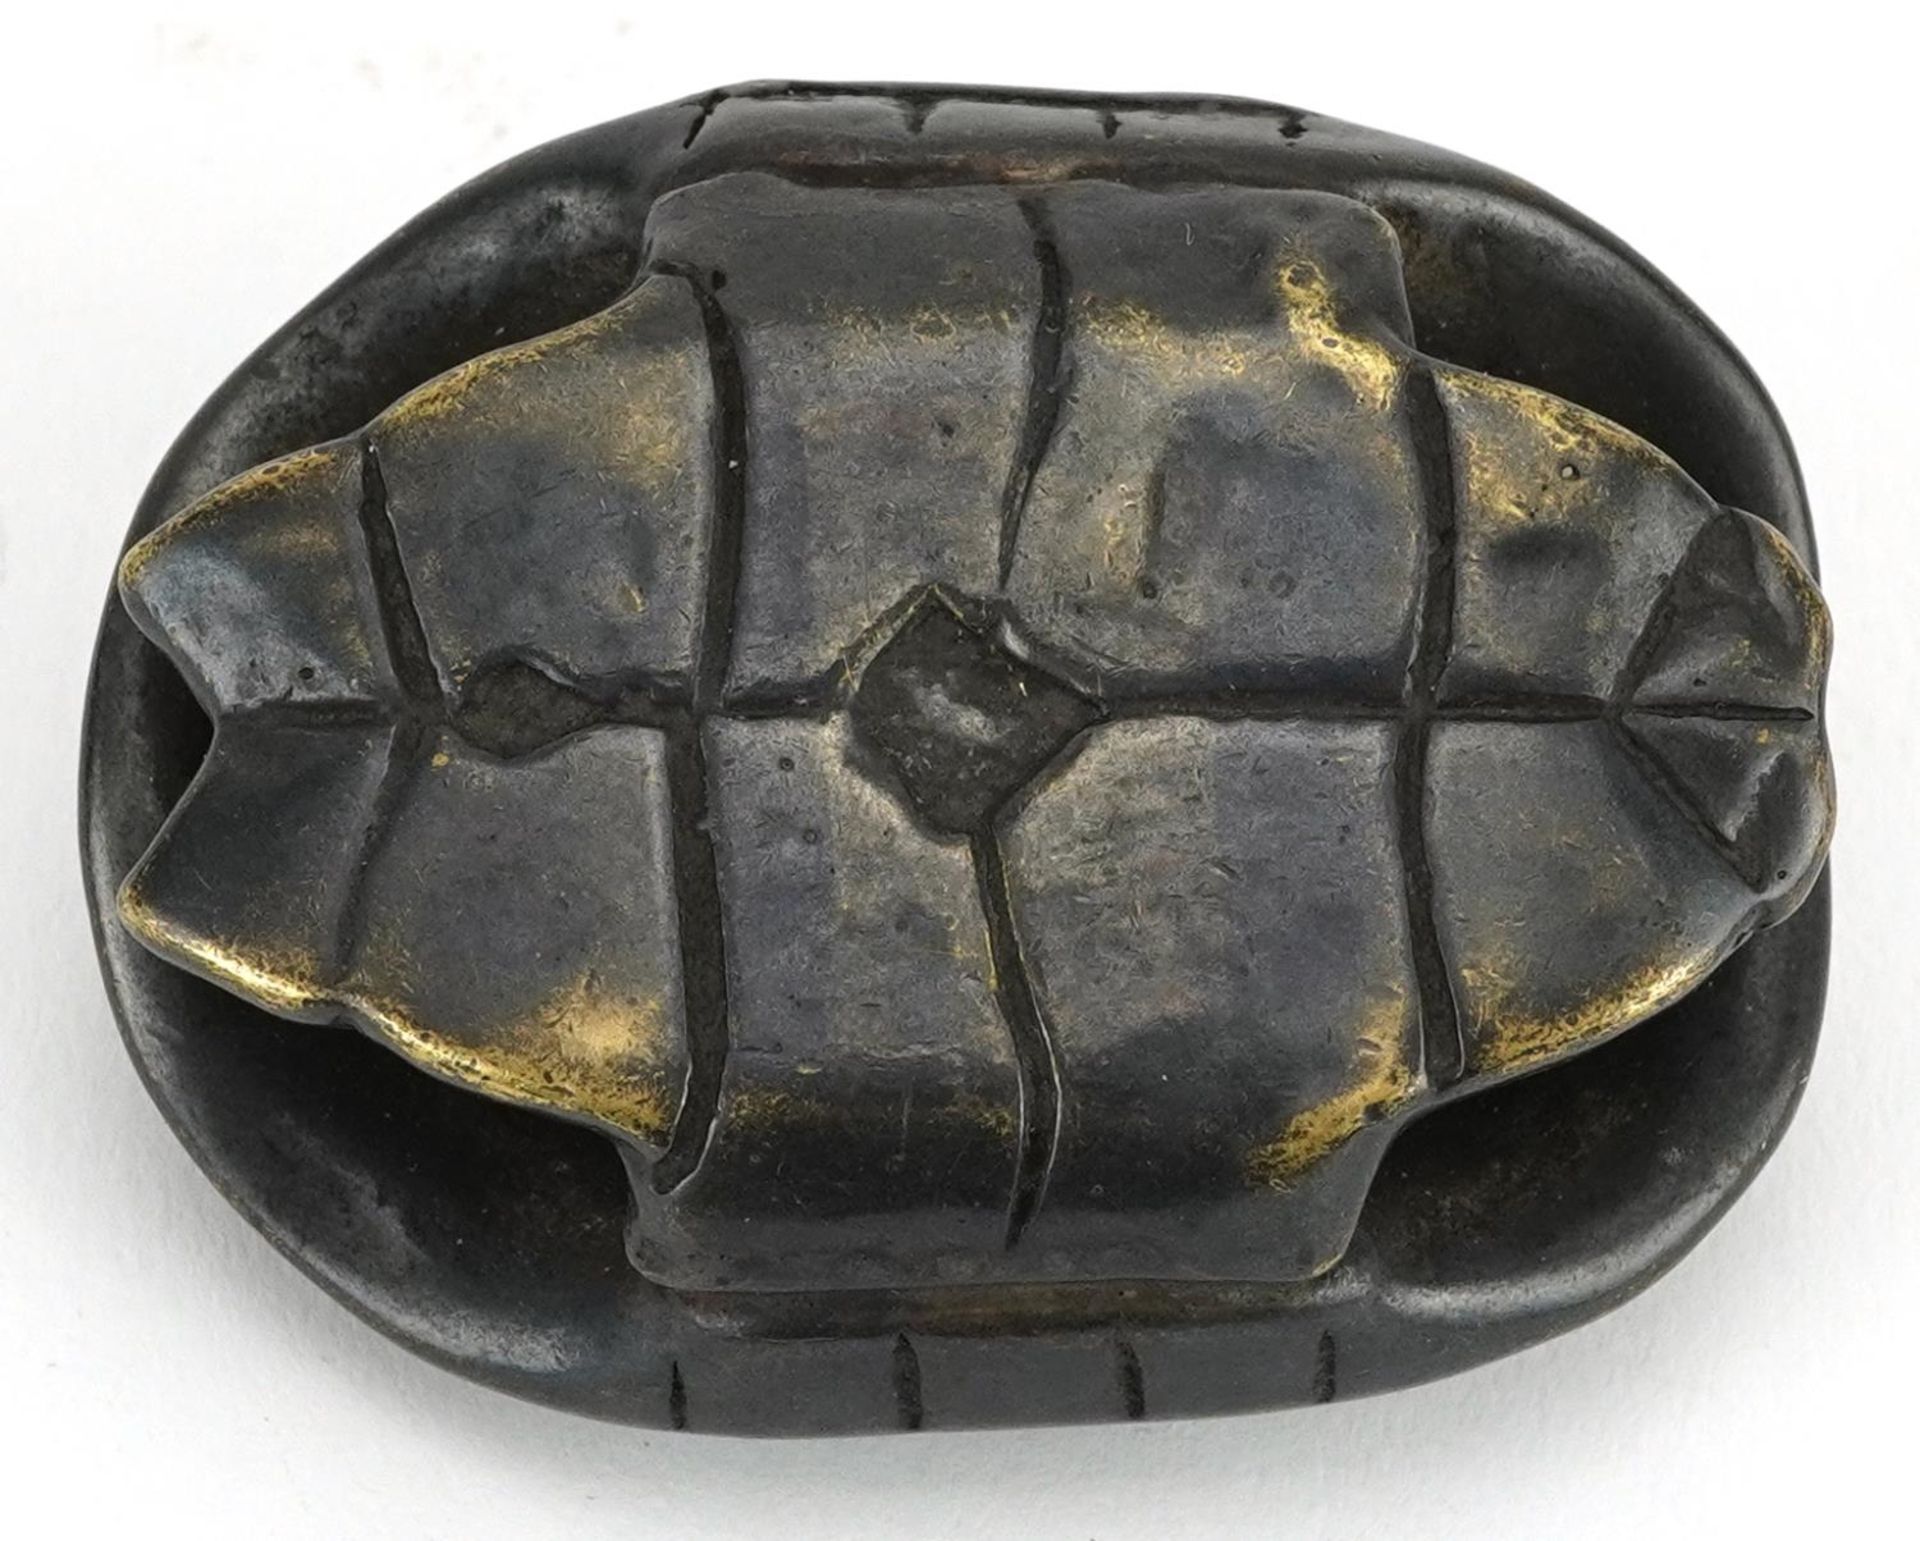 Patinated bronze model of a turtle shell, 6cm in length - Image 3 of 3